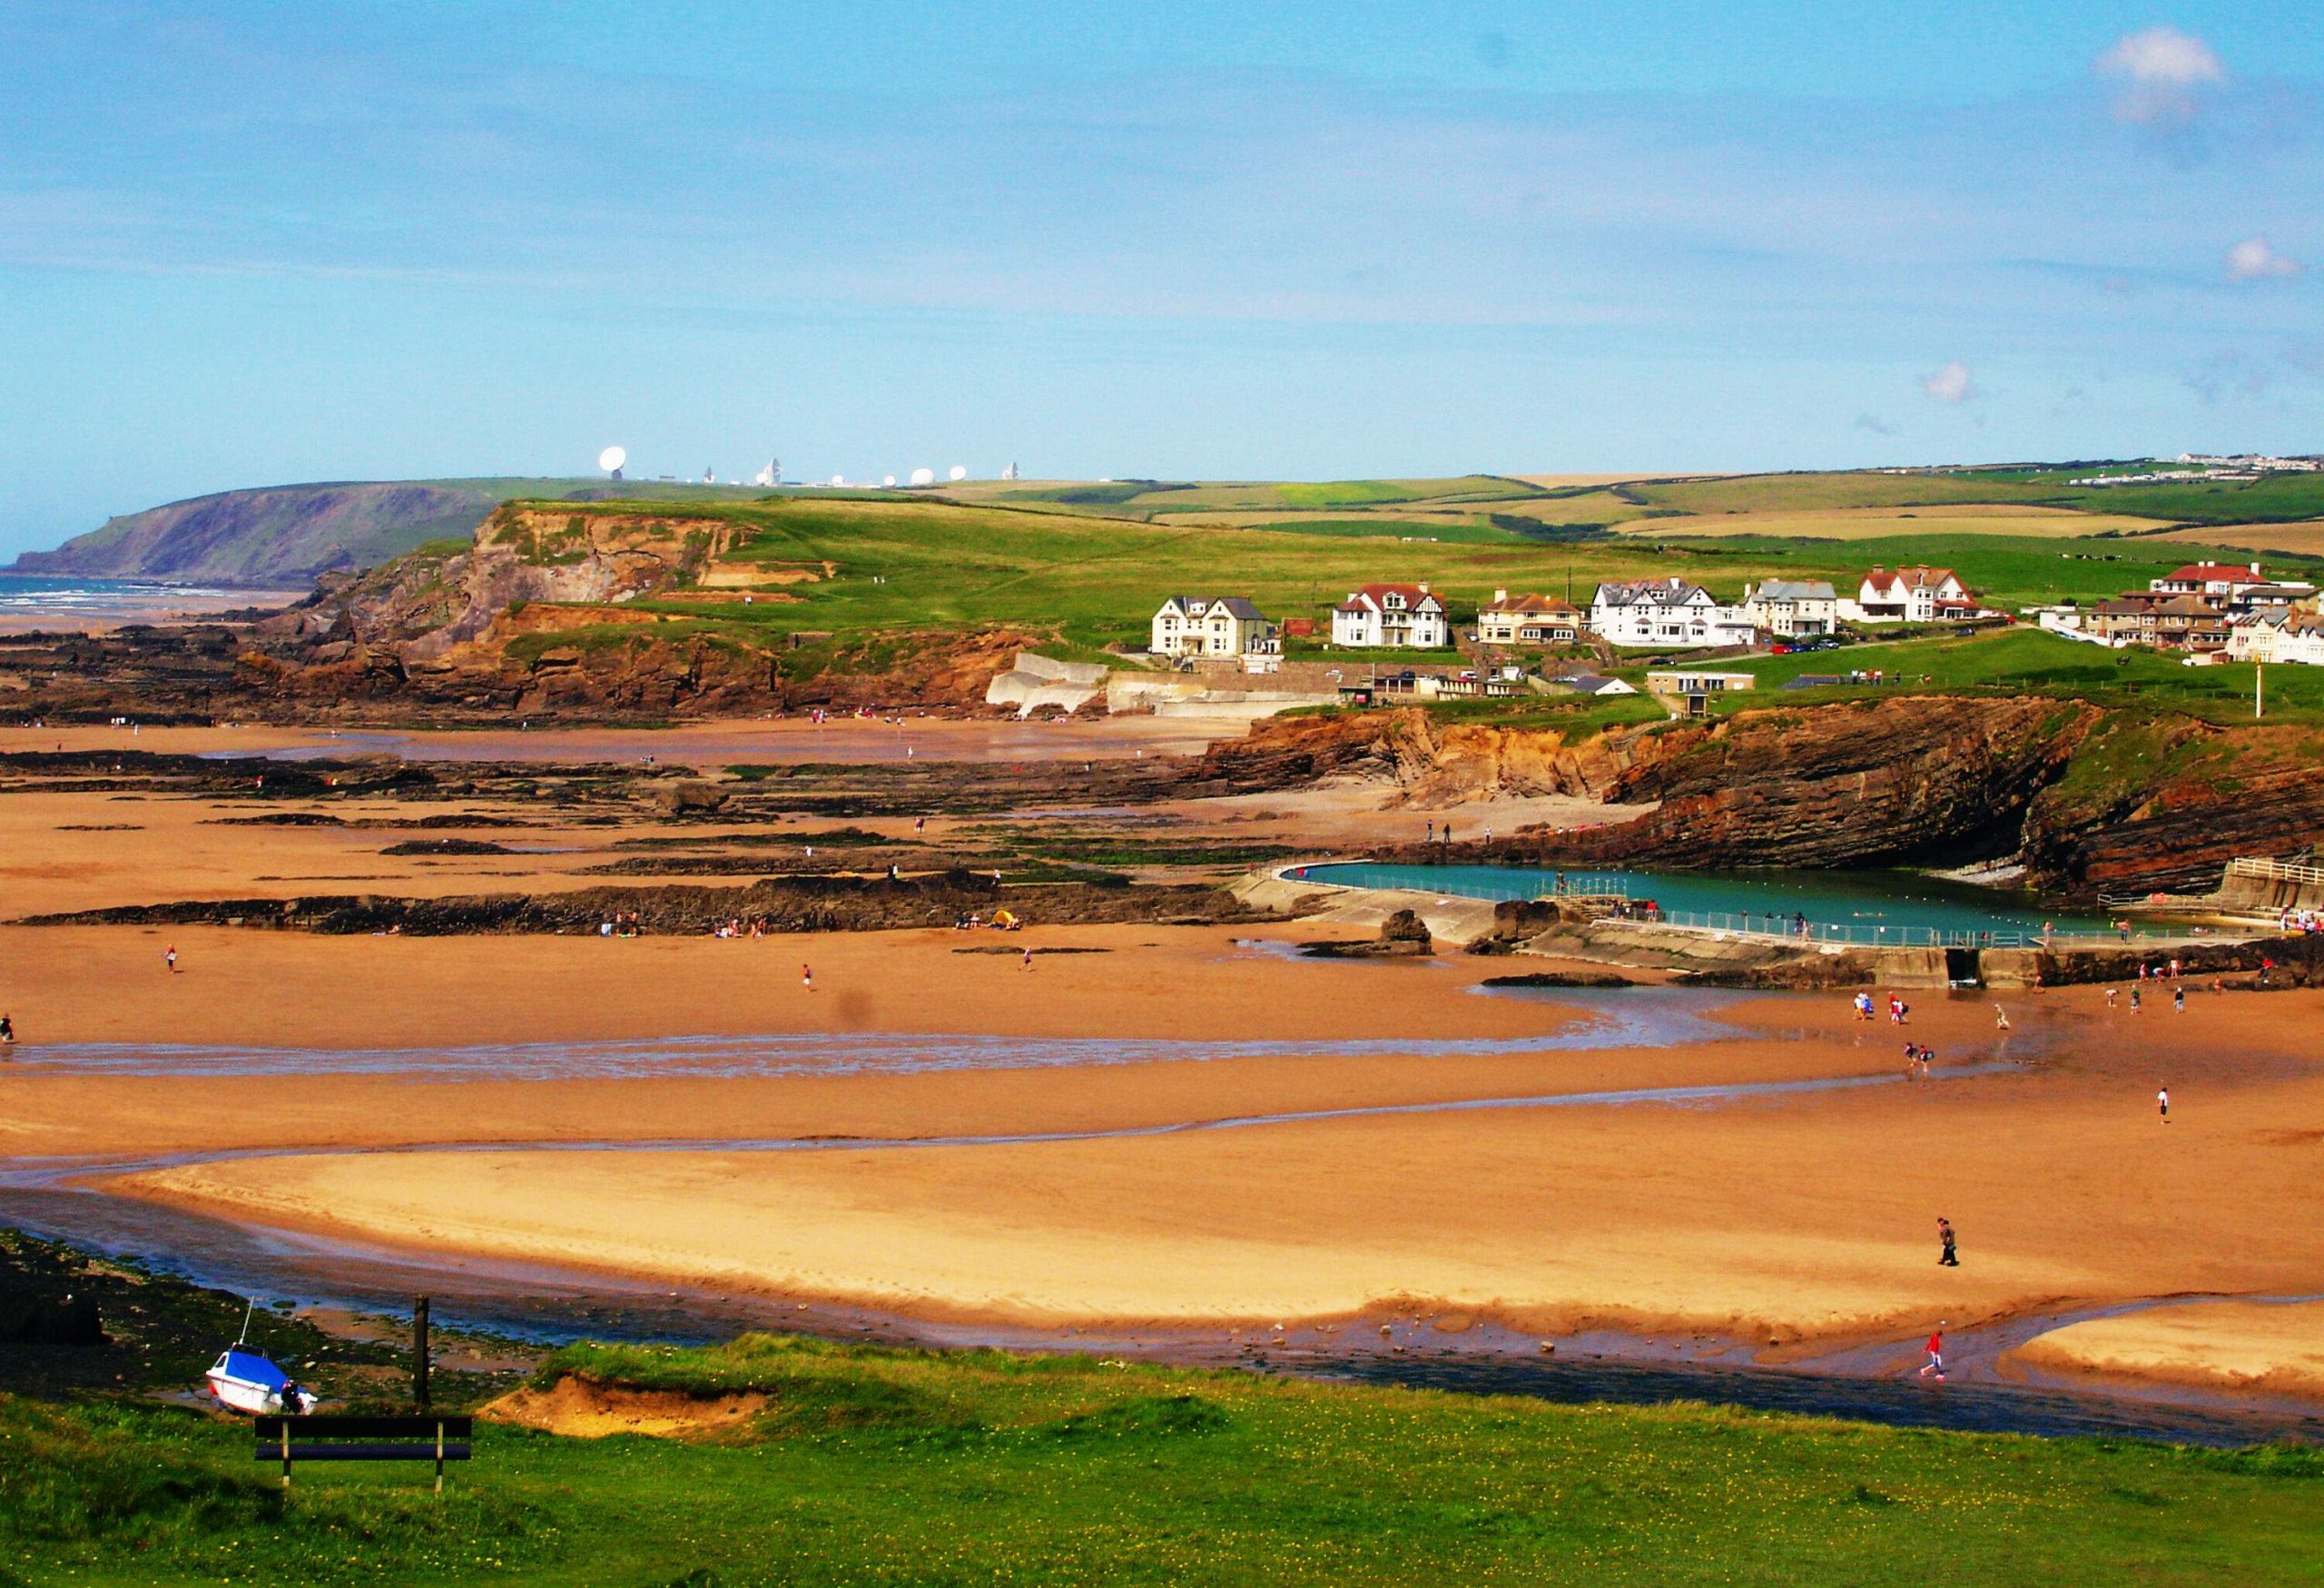 A sandy stretch beach shore features a rock pool beneath the lush cliff with classic white houses.